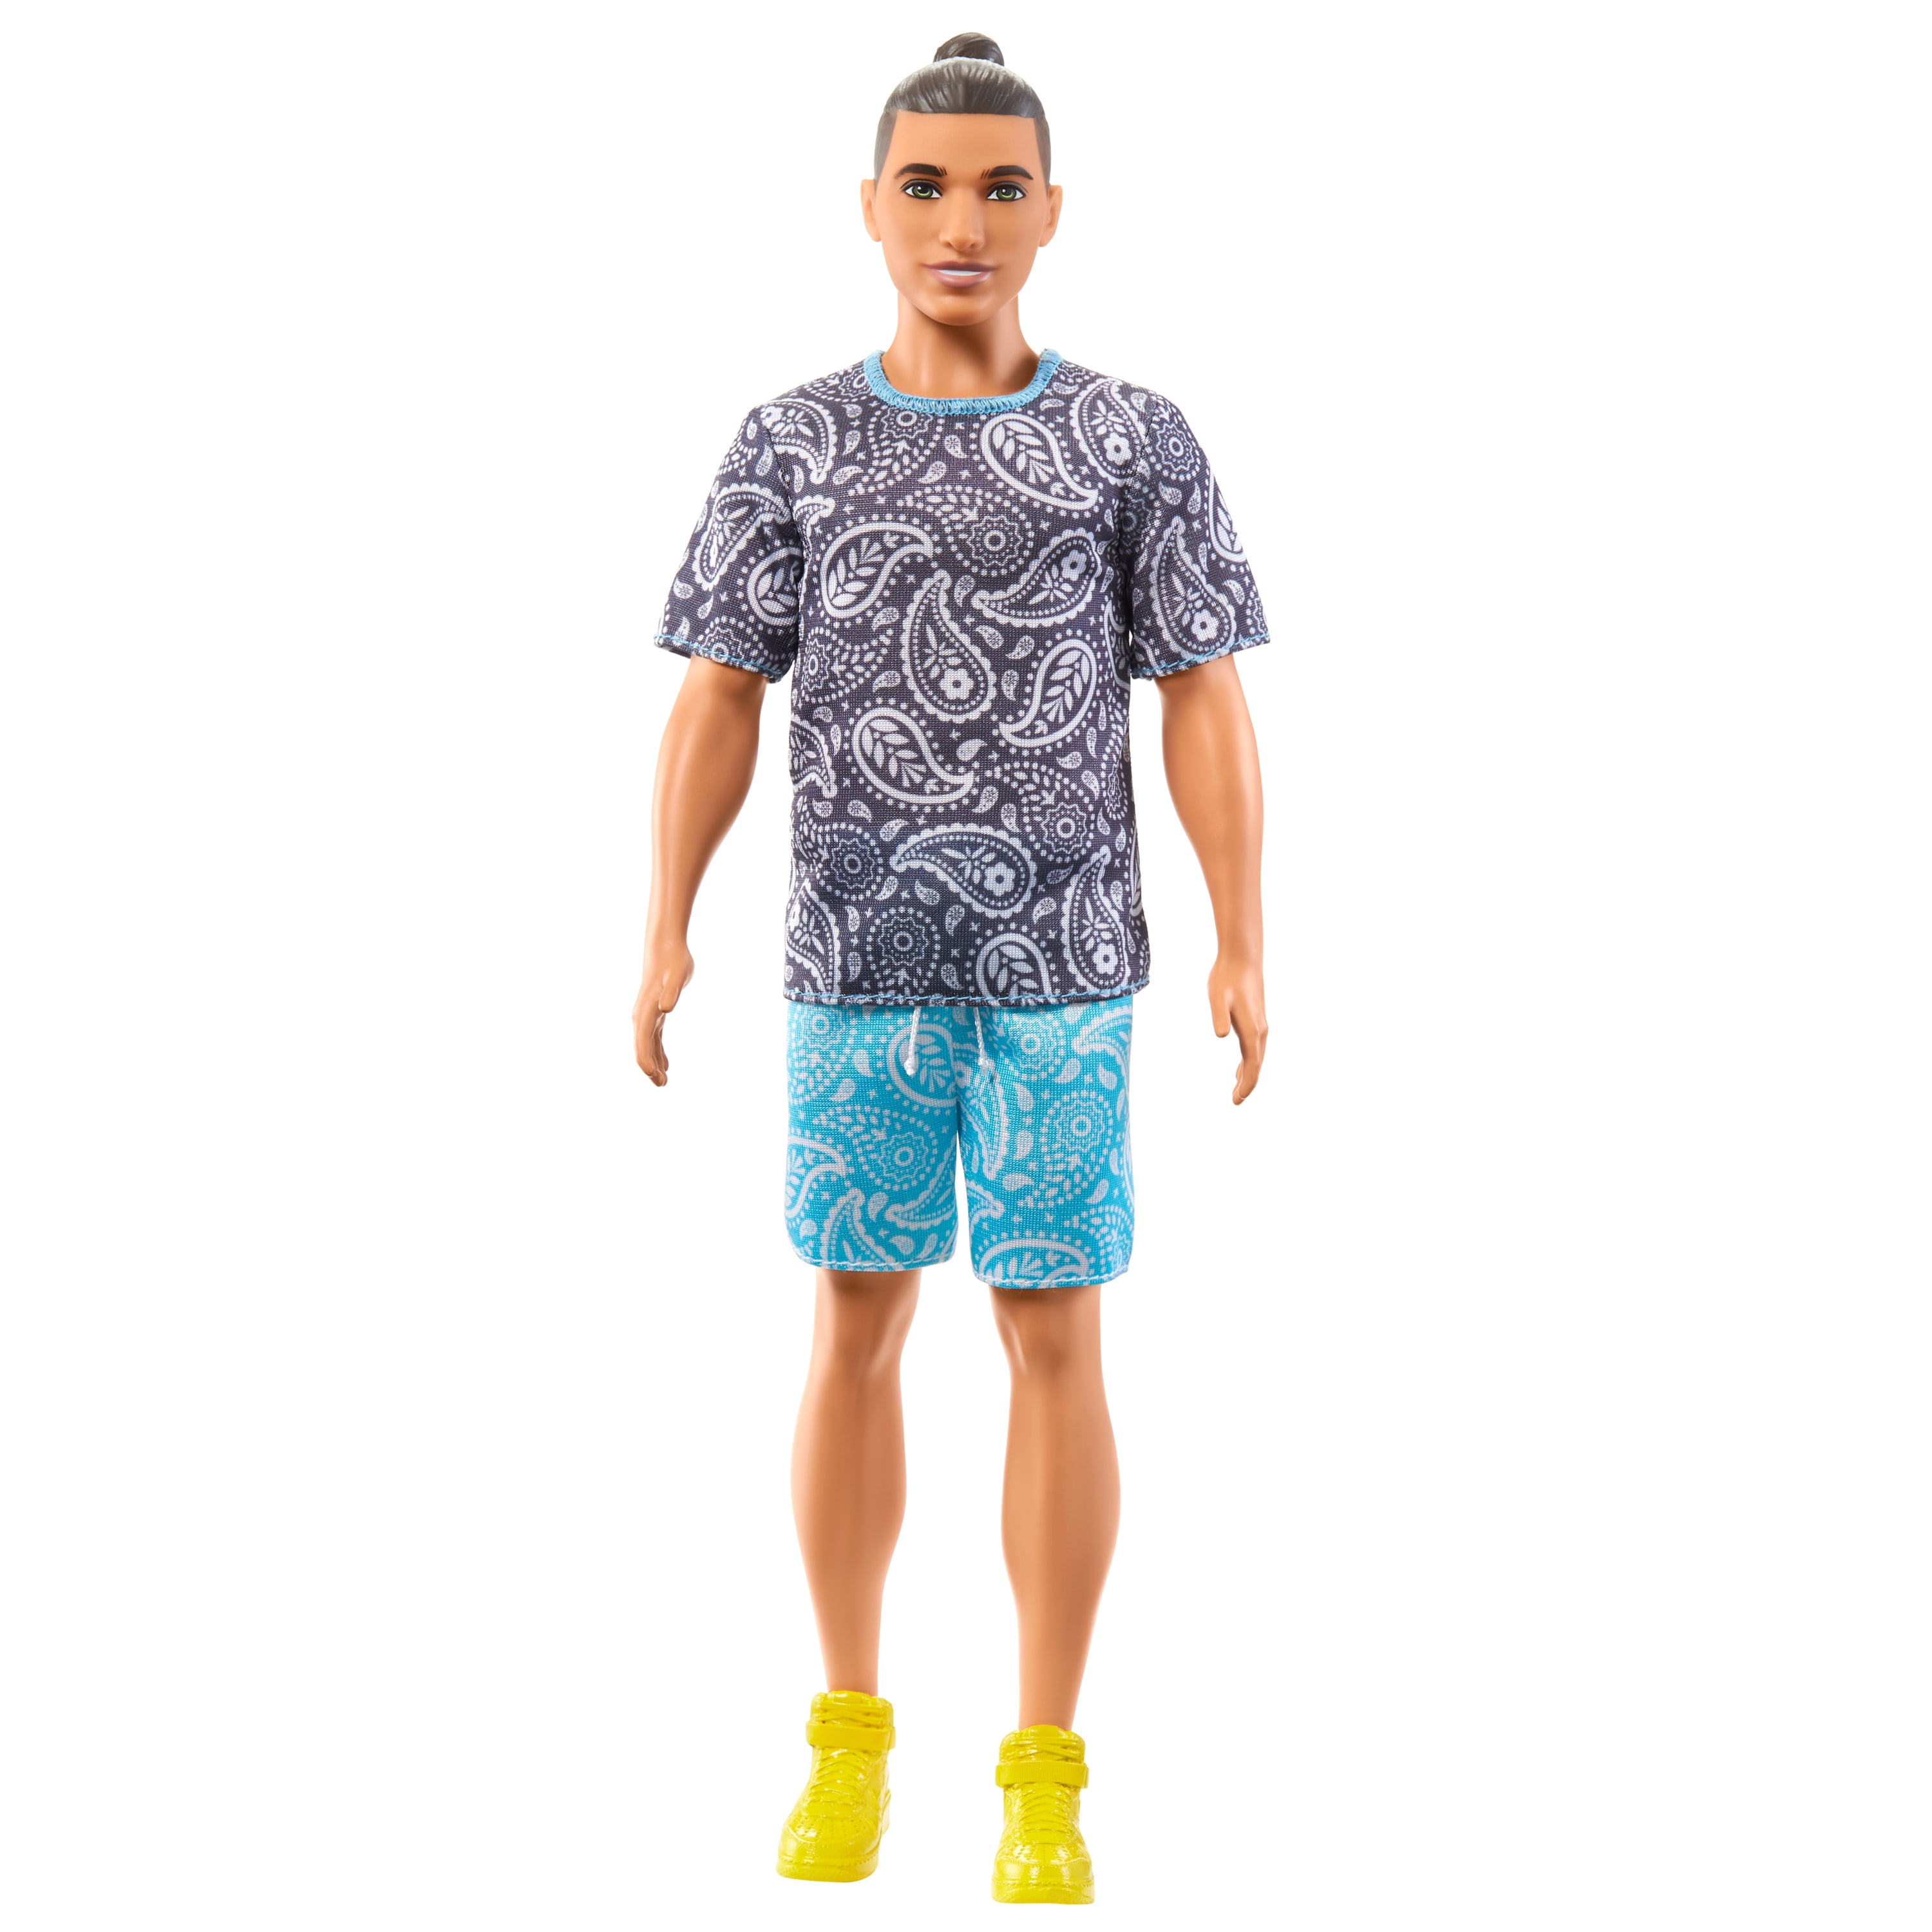 Barbie Fashionistas Ken Fashion Doll #204 in Paisley Tee & Shorts with ...